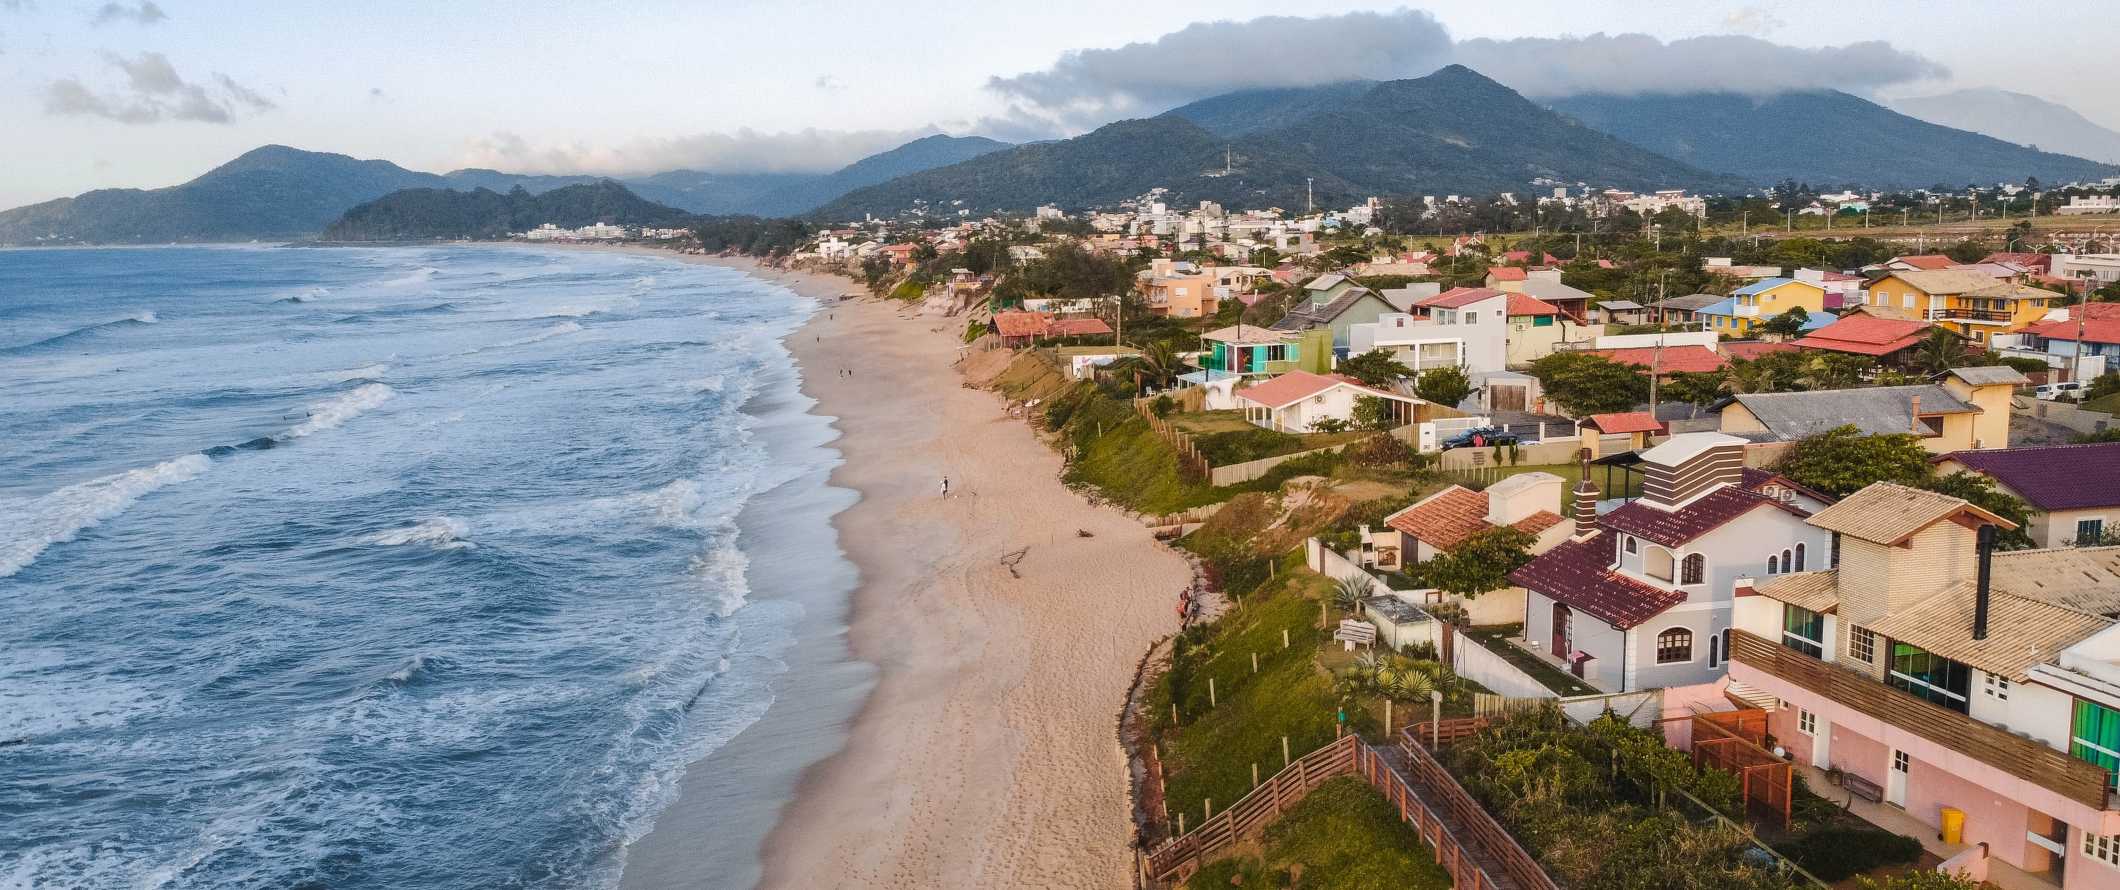 Colorful houses along the beach with mountains in the background in Florianópolis, Brazil